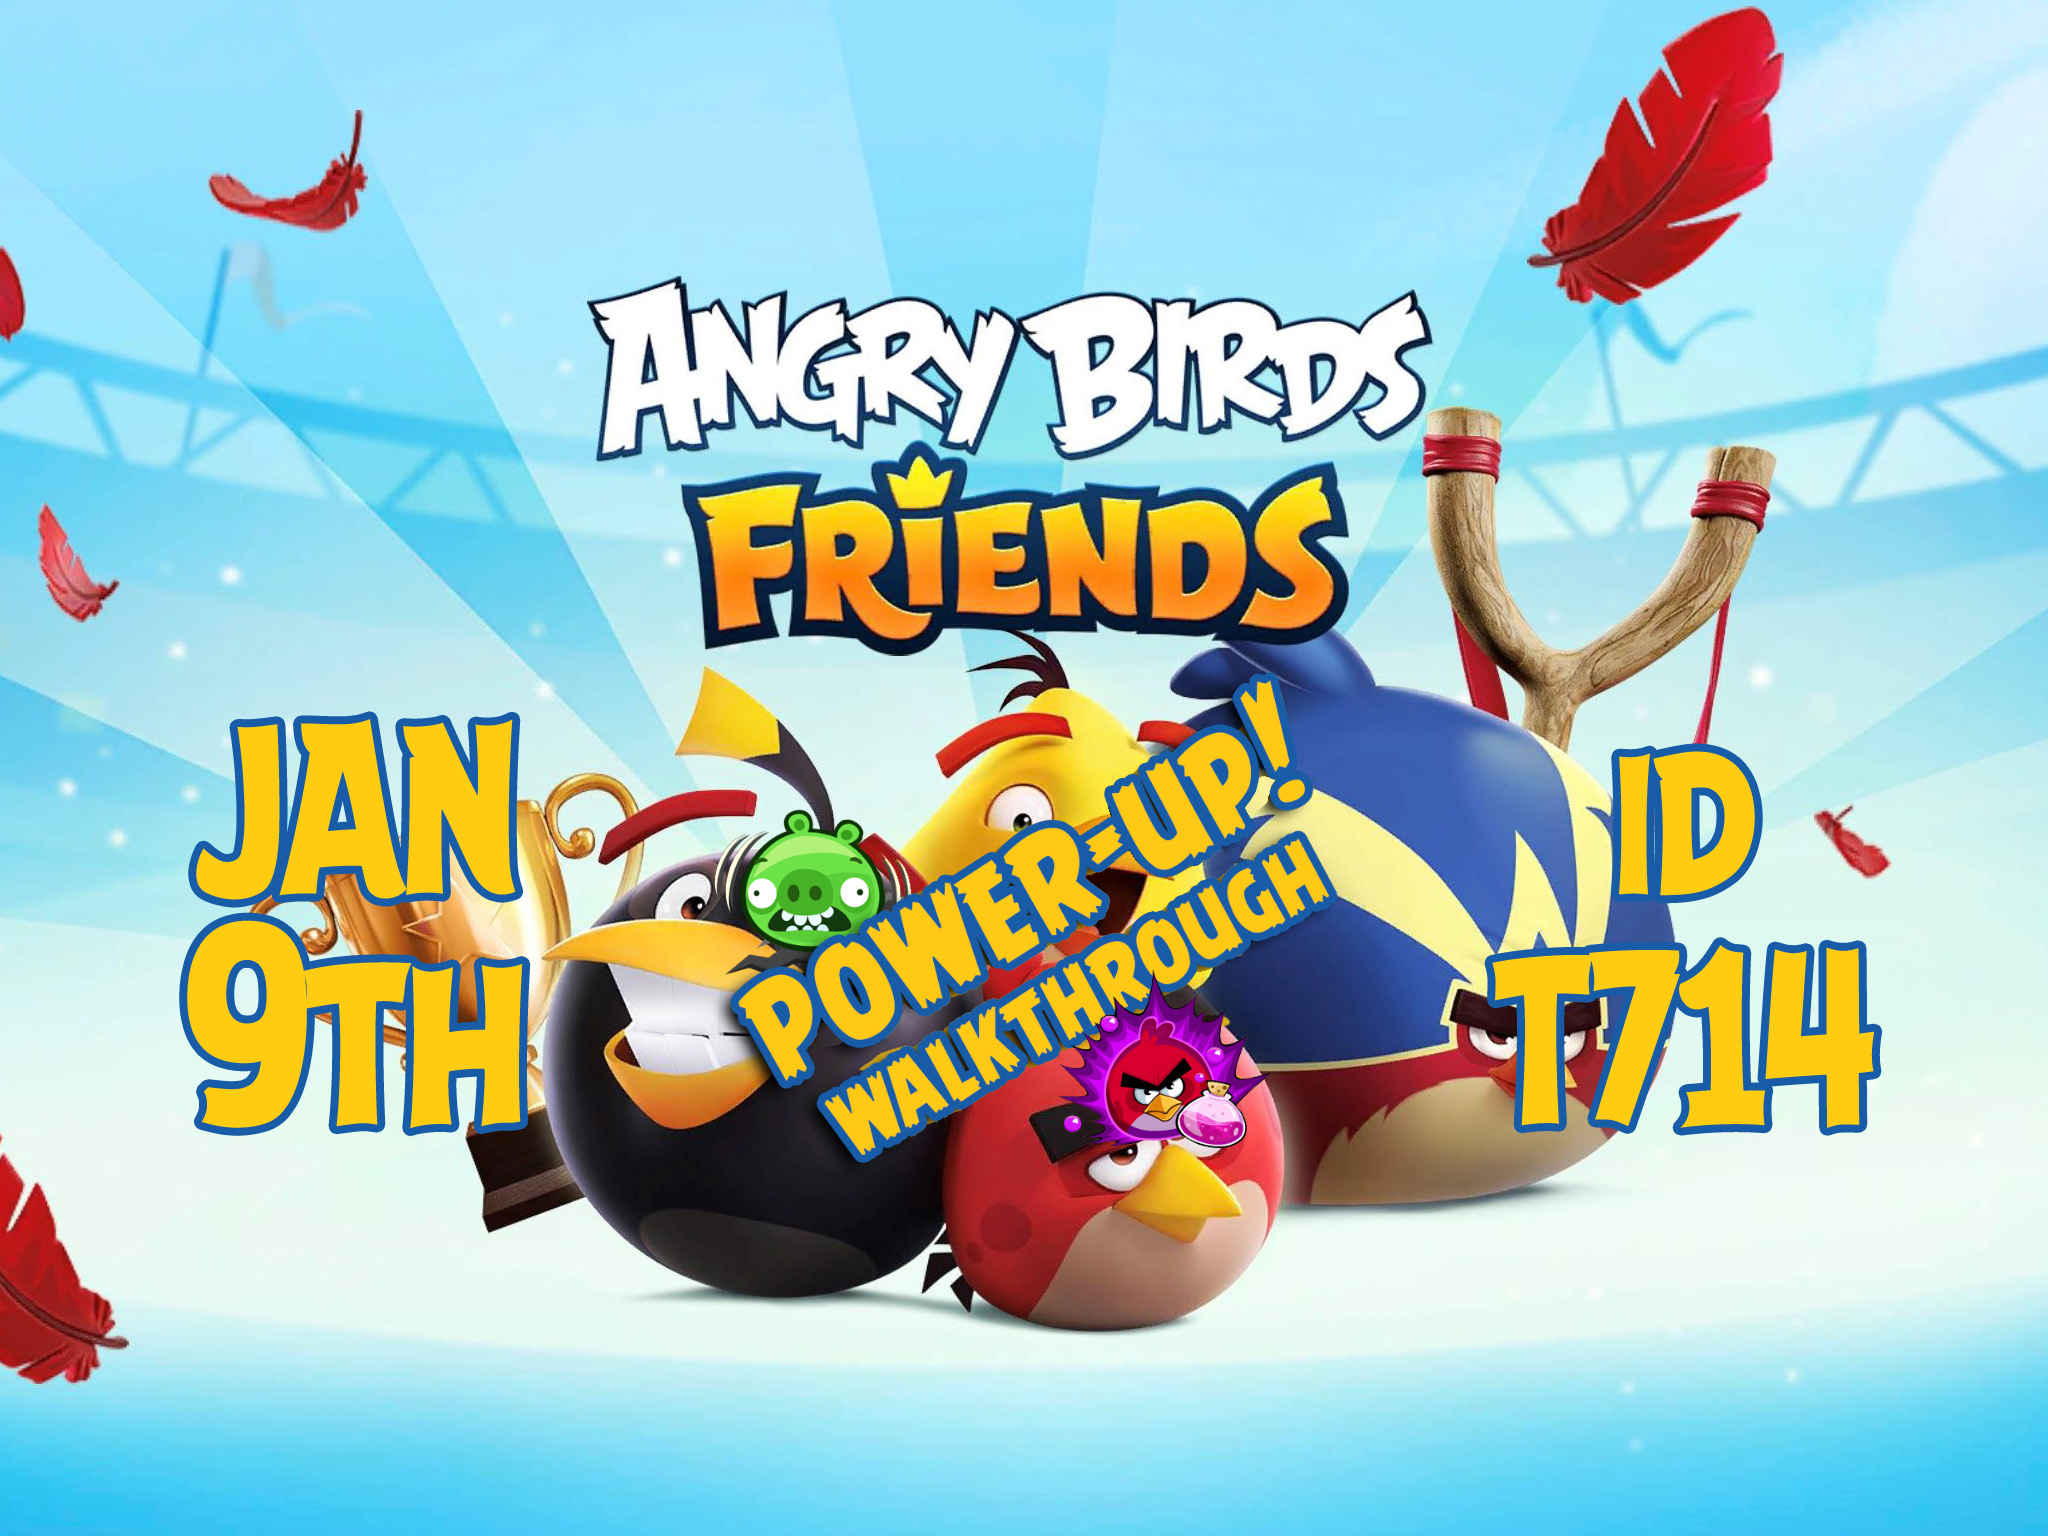 Angry-Birds-Friends-Tournament-T714-Feature-Image-PU